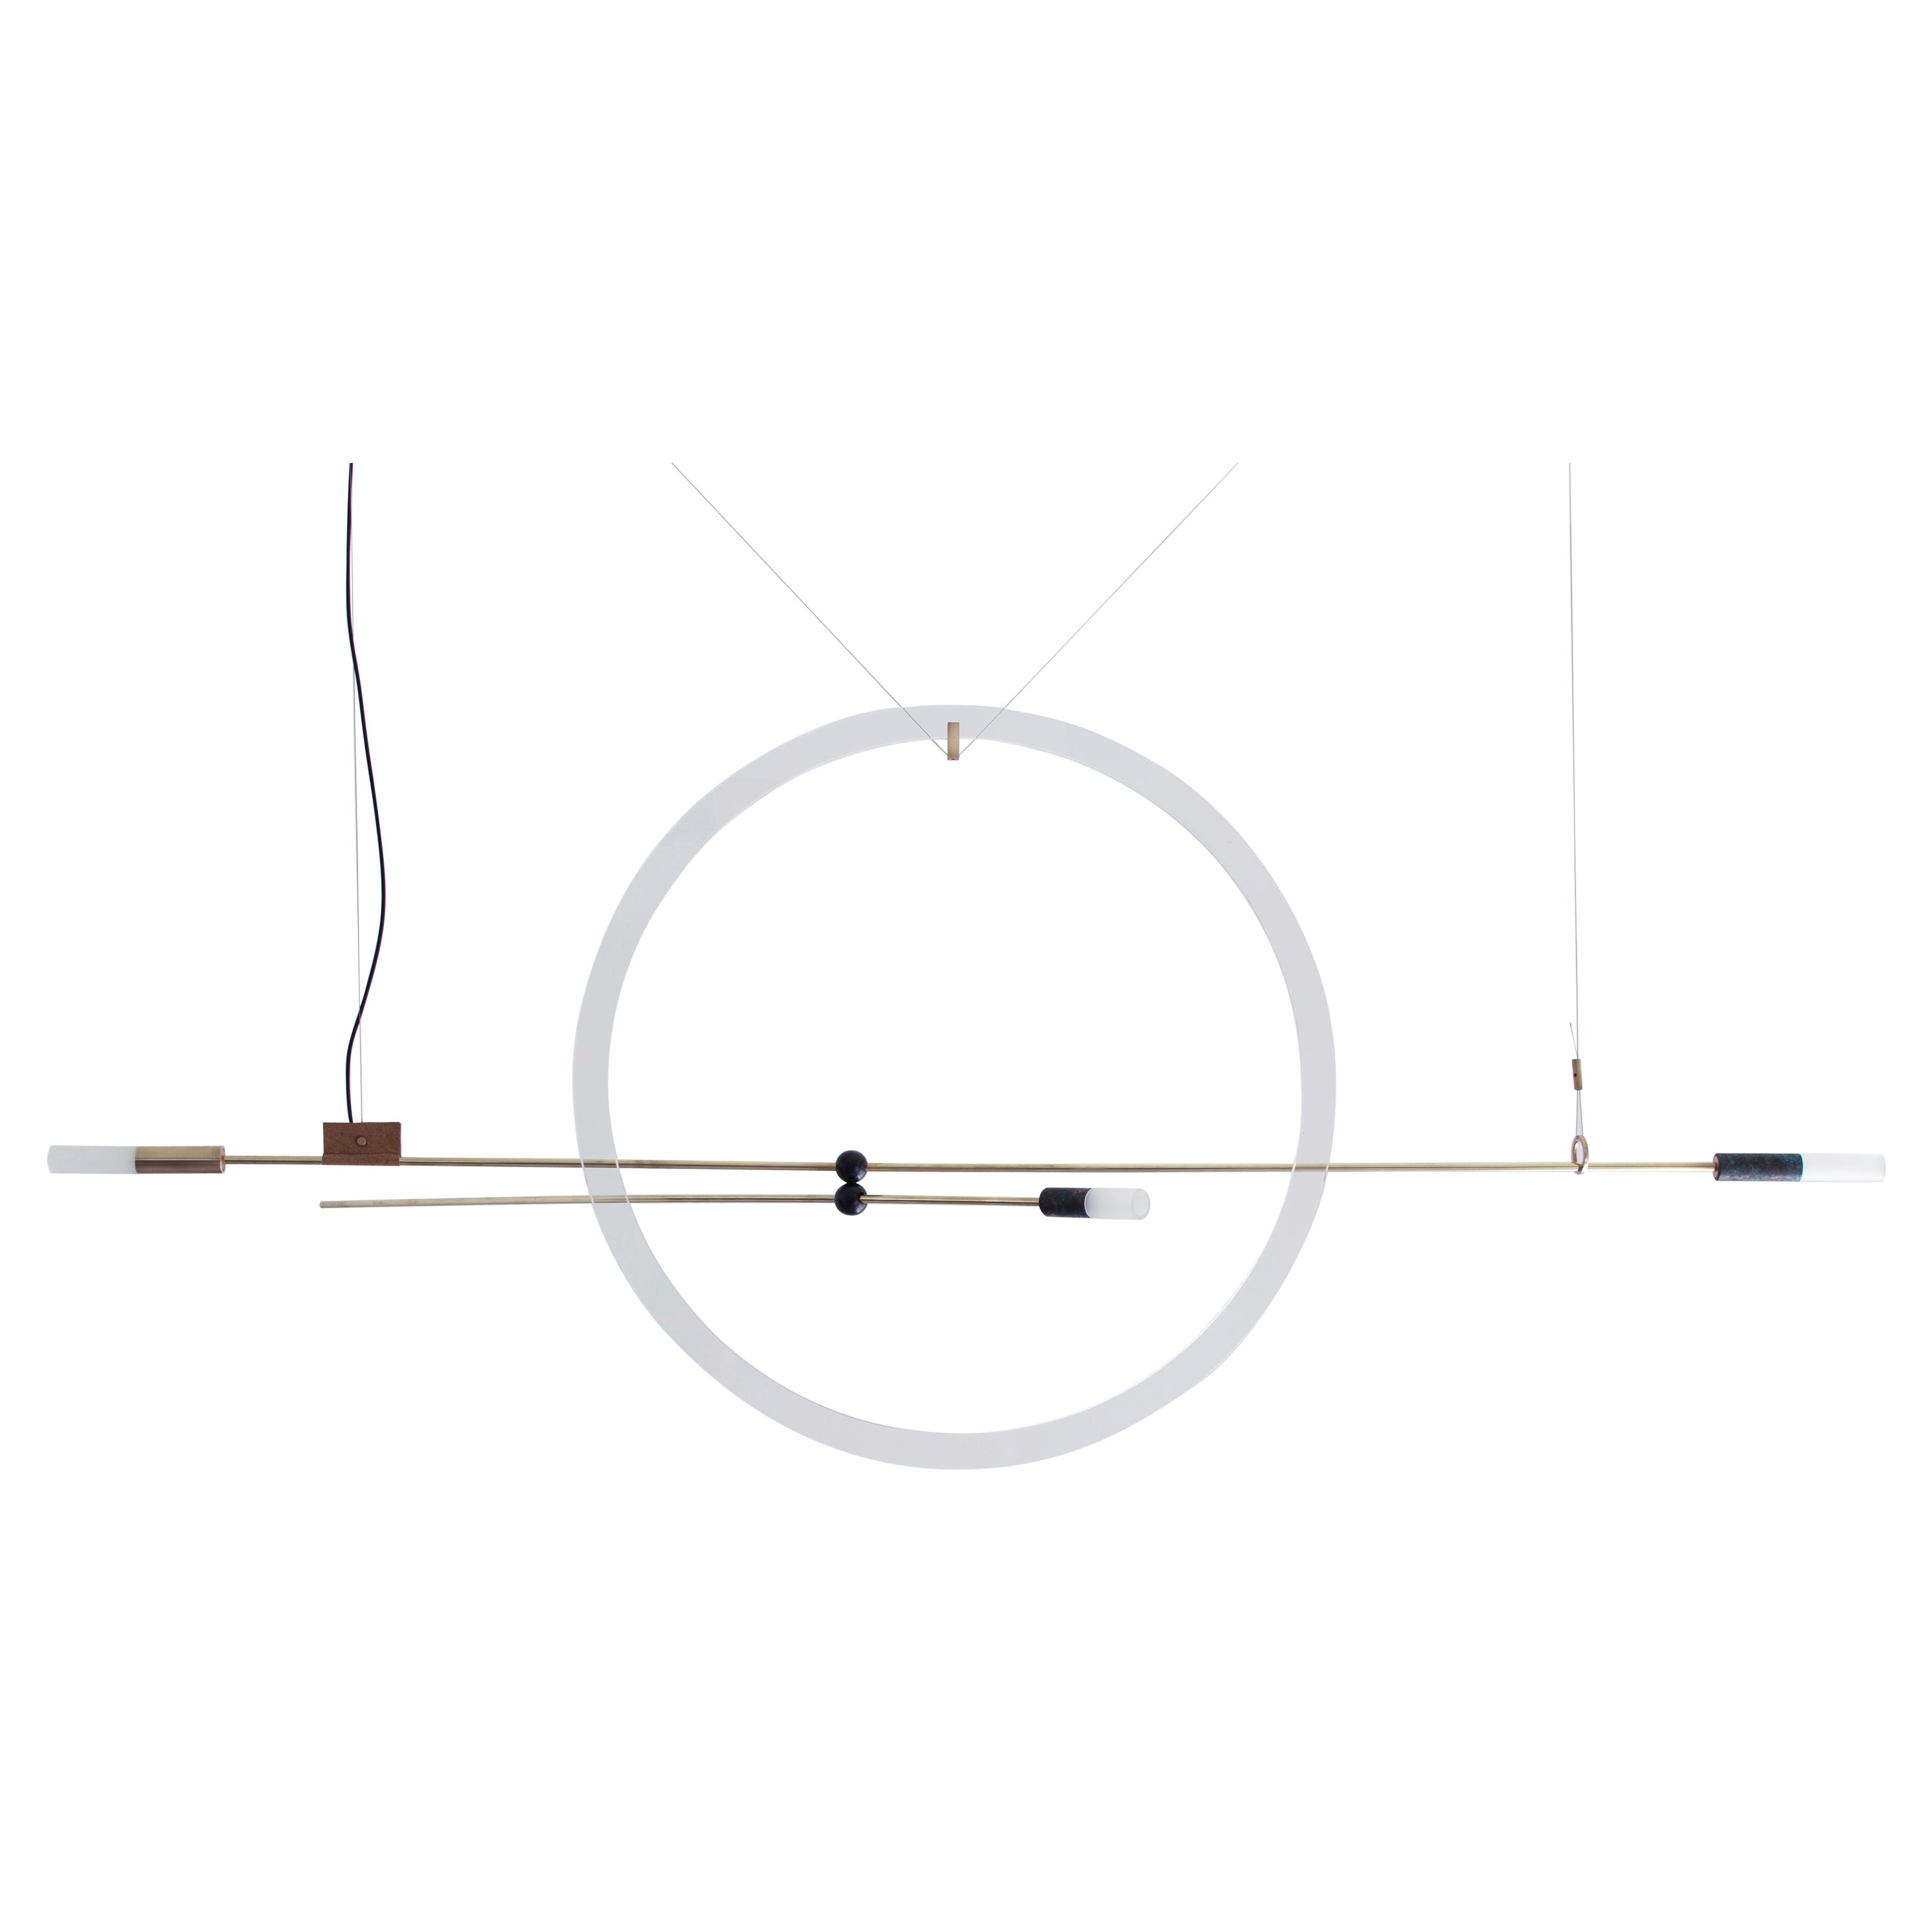 Brass Sculpted Light Suspension 'Opus XI', Periclis Frementitis For Sale